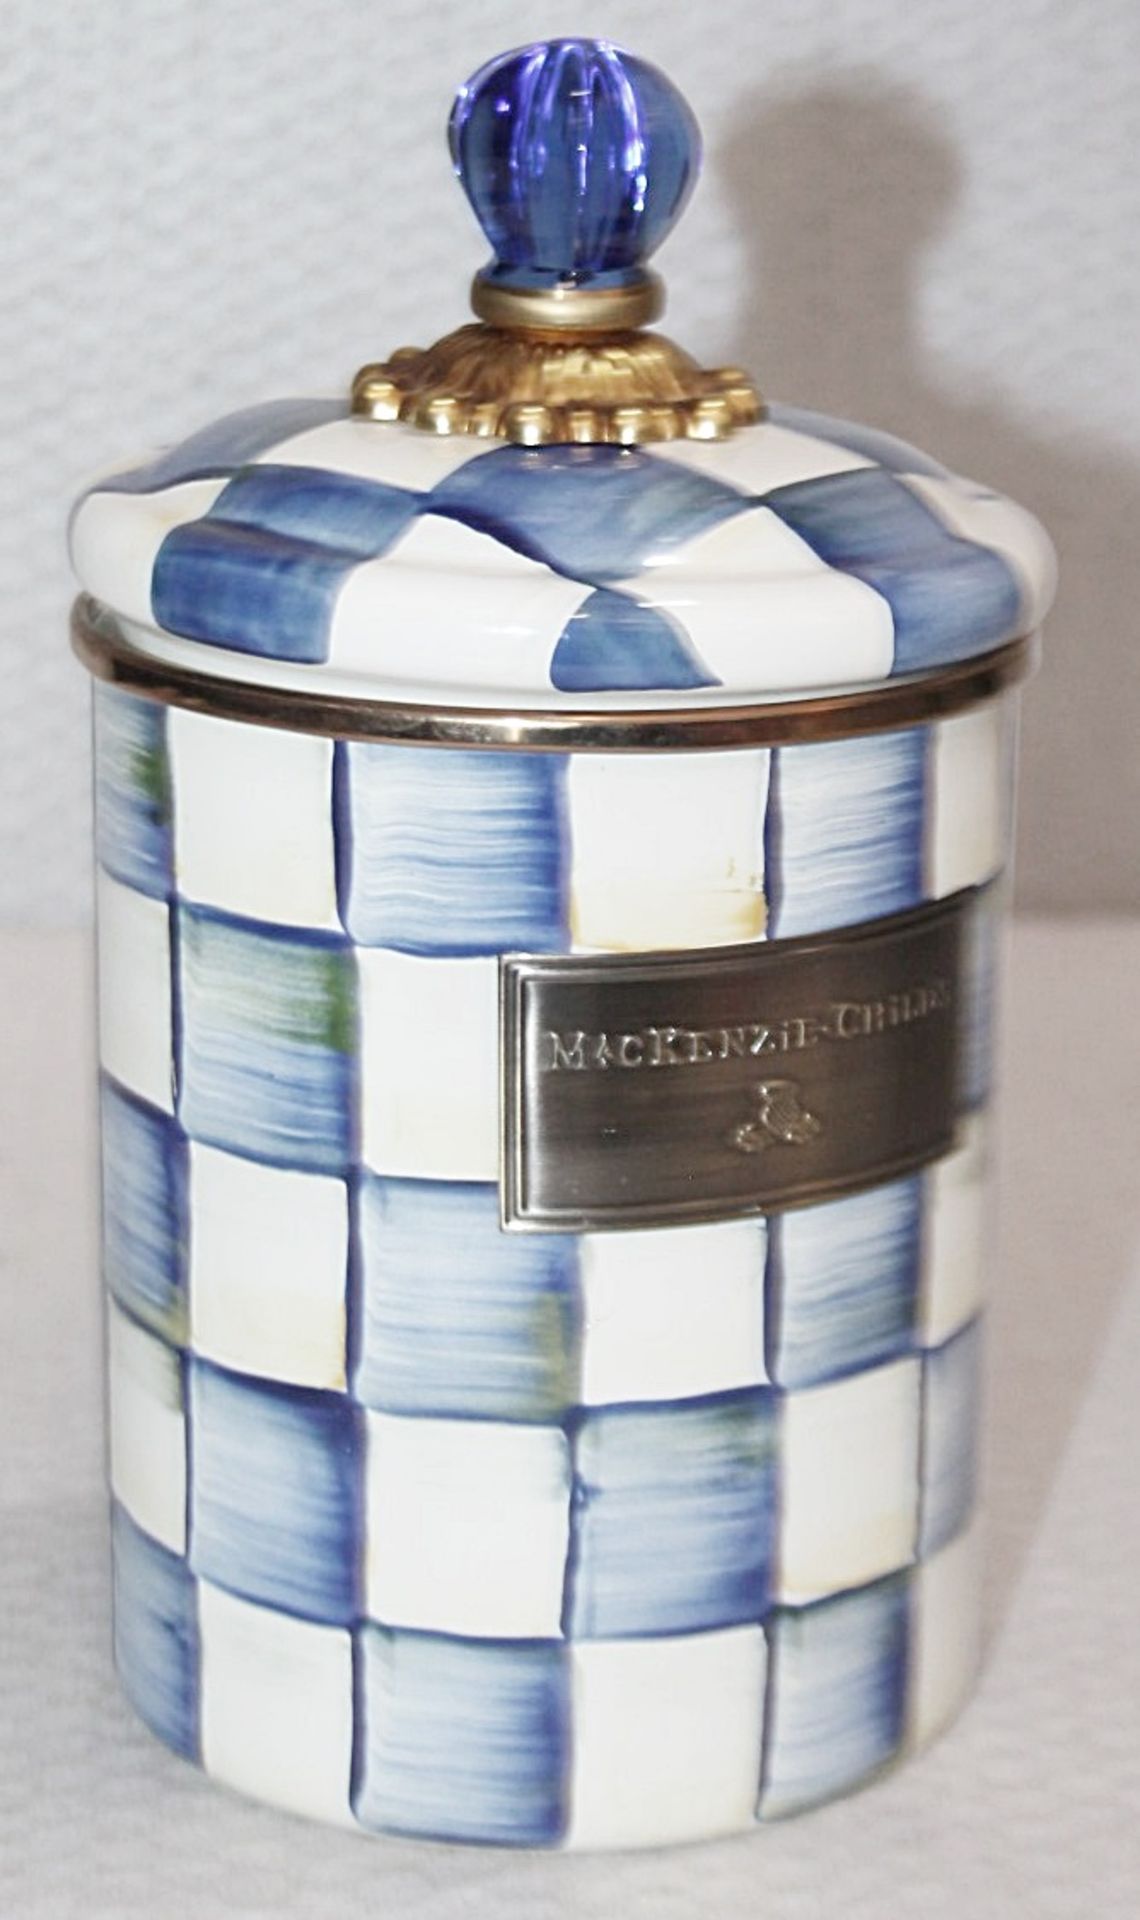 1 x MACKENZIE-CHILDS Handpainted 'Royal Check' Canister - Original Price £104.00 *Read Condition - Image 3 of 7